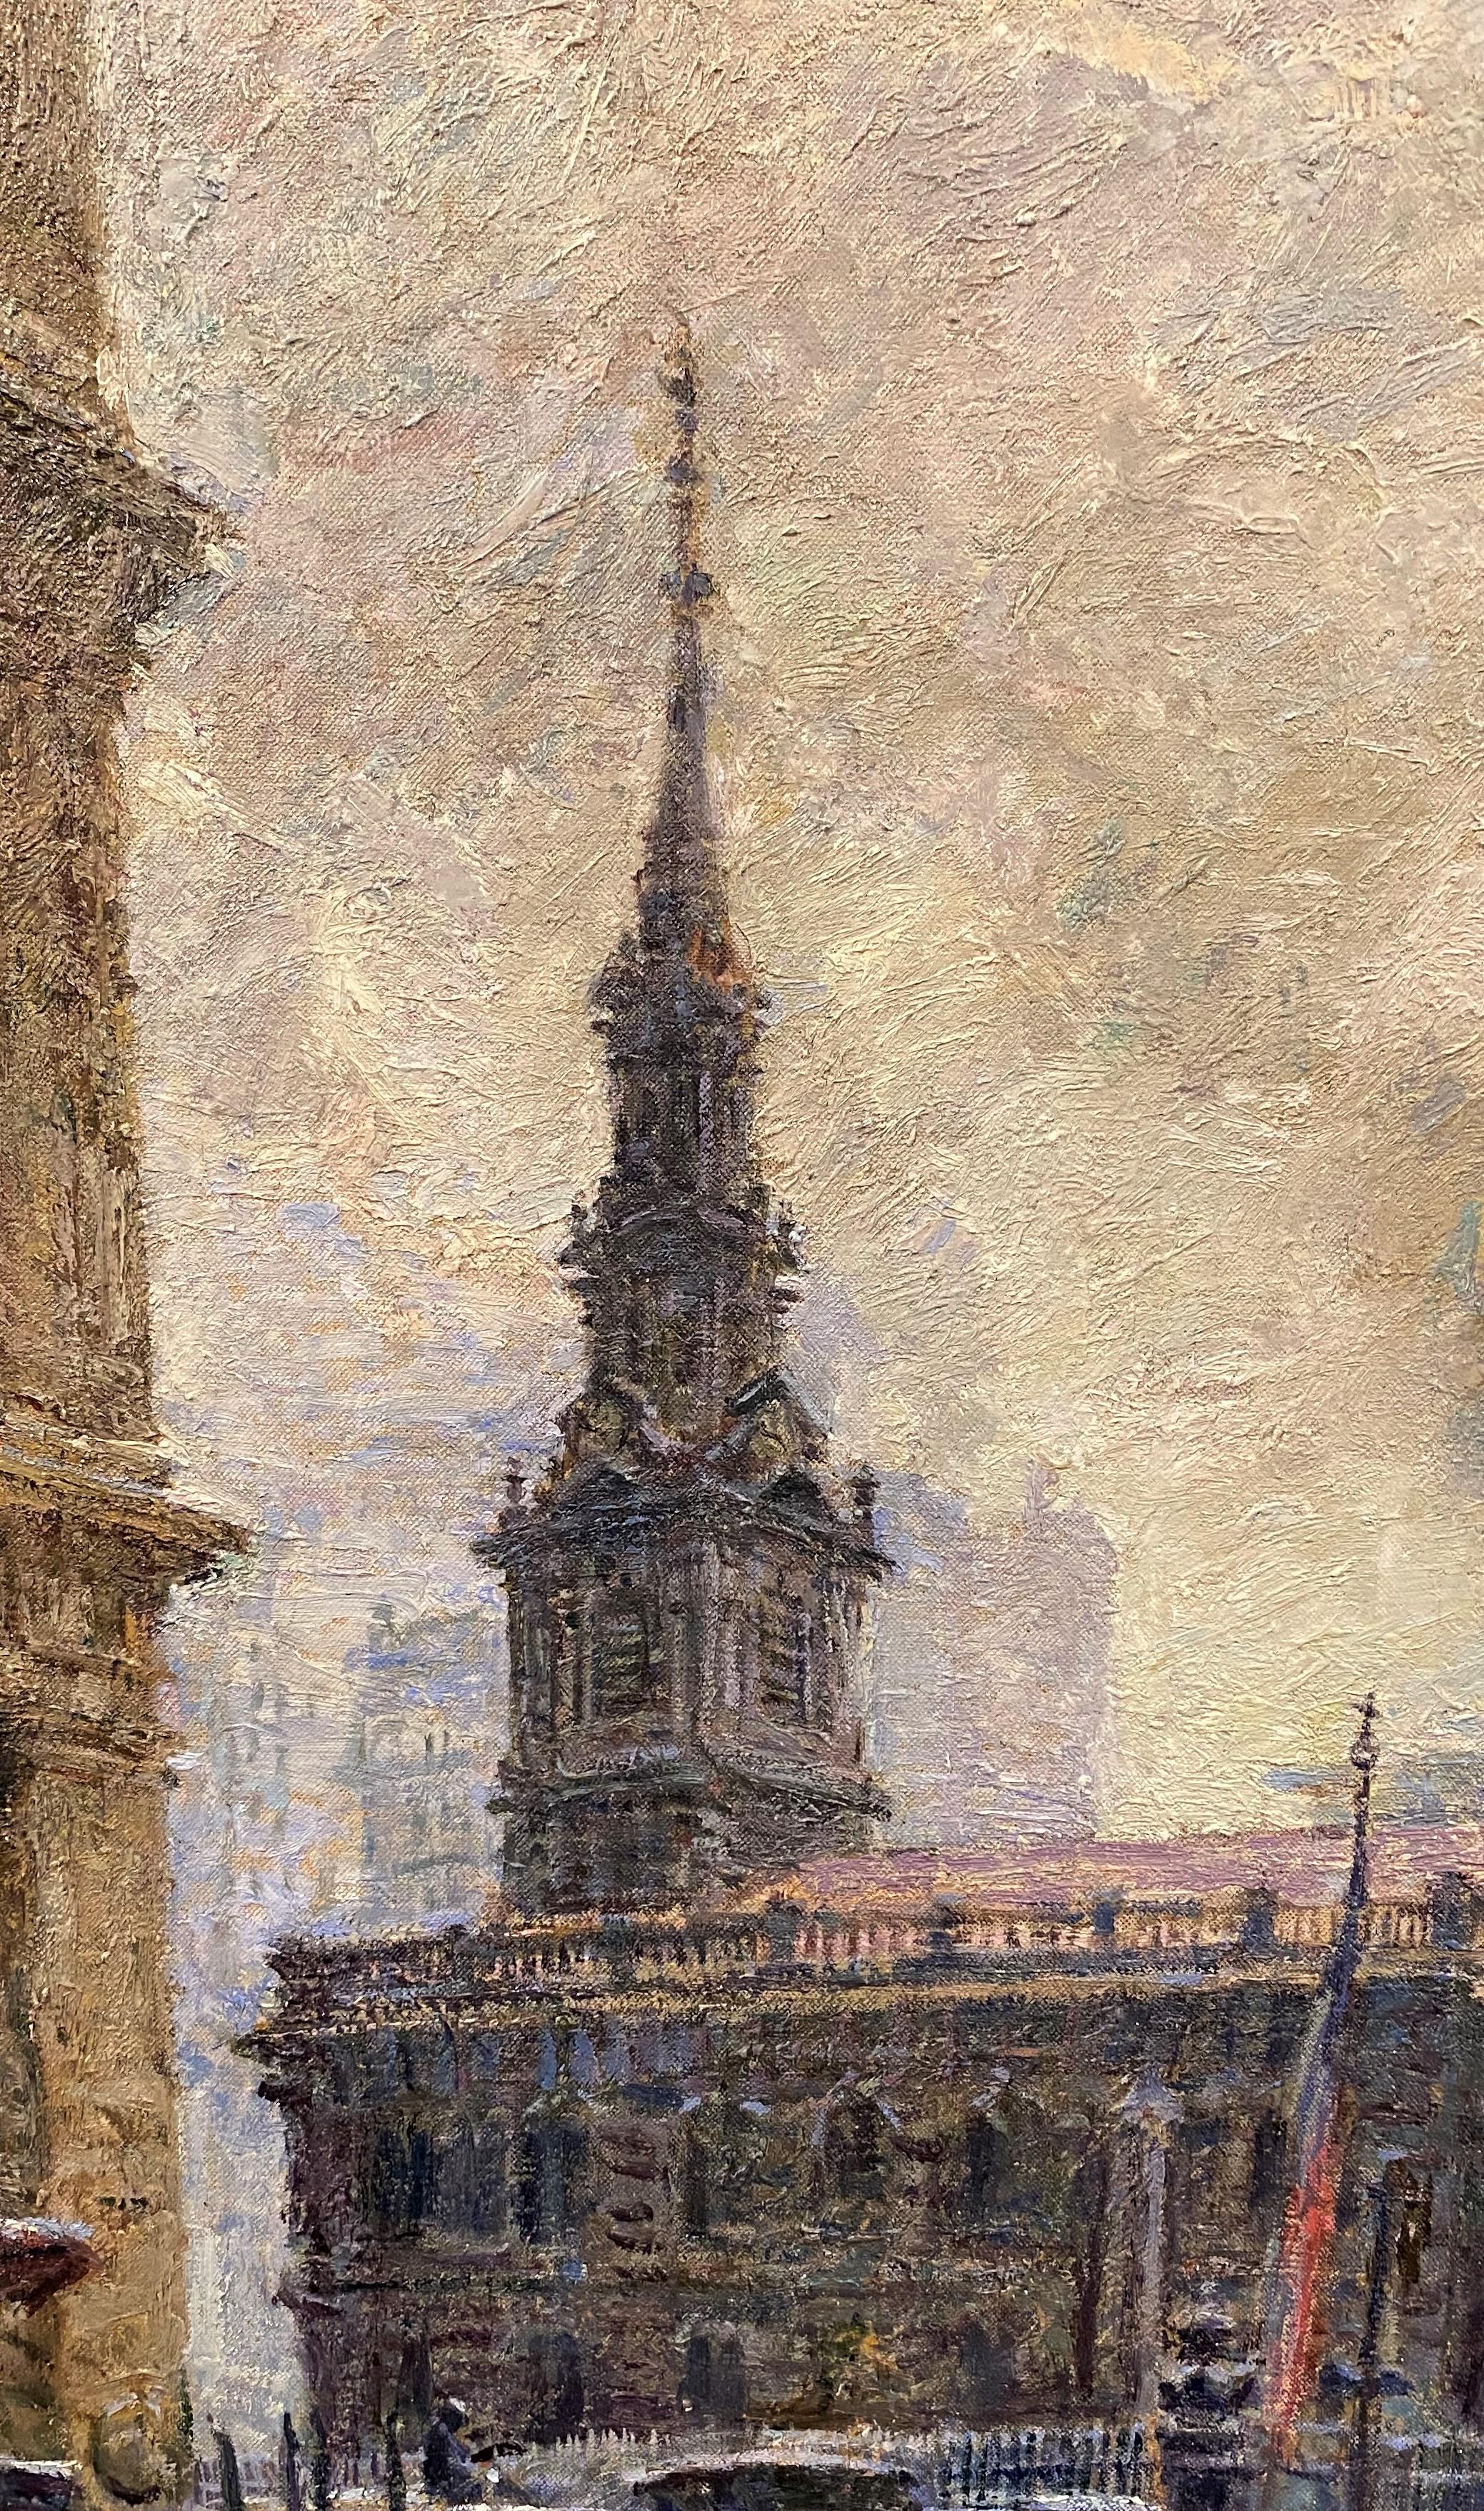 St. Paul’s From John Street, NY - American Impressionist Painting by Felicie Howell